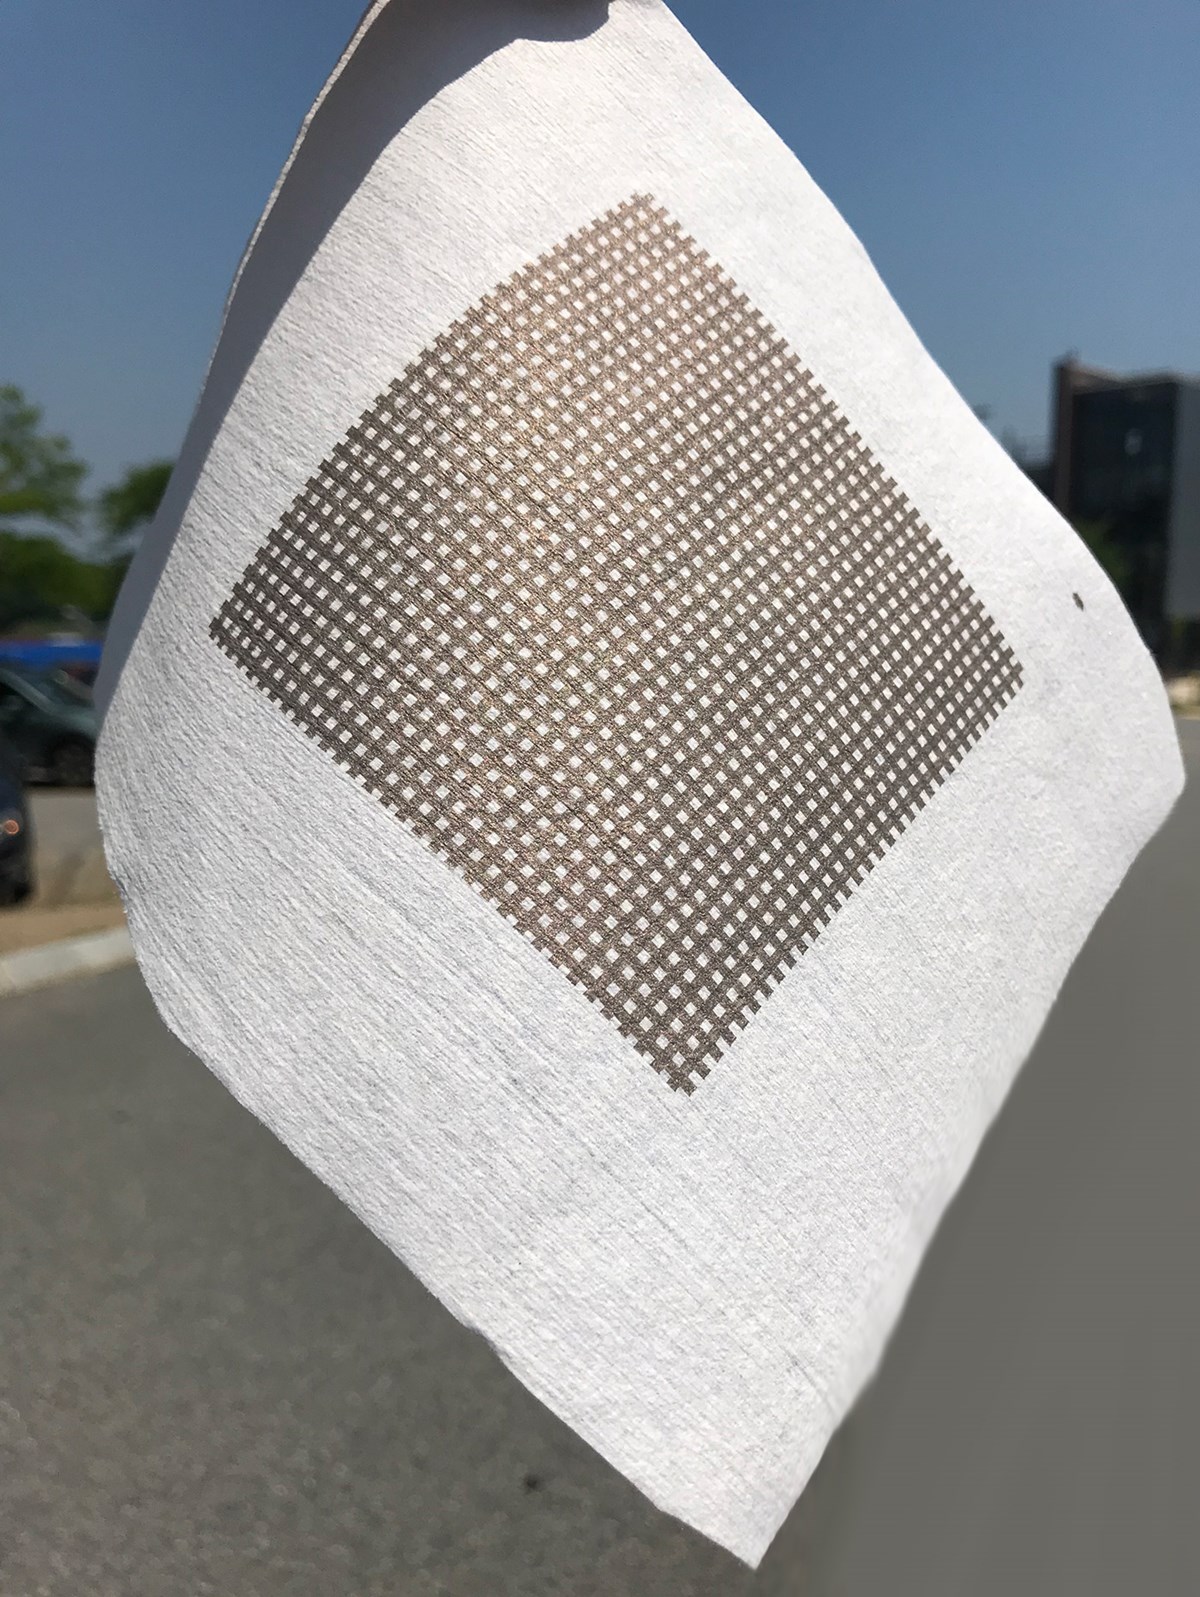 Printed metallic structures on fabric. The UMass Lowell Fabric Discovery Center is home to the first and only site in the nation that integrates discoveries from three Manufacturing USA Innovation Institutes. The synergy between high-tech fabrics and flexible electronics combined with robotics could change the world.